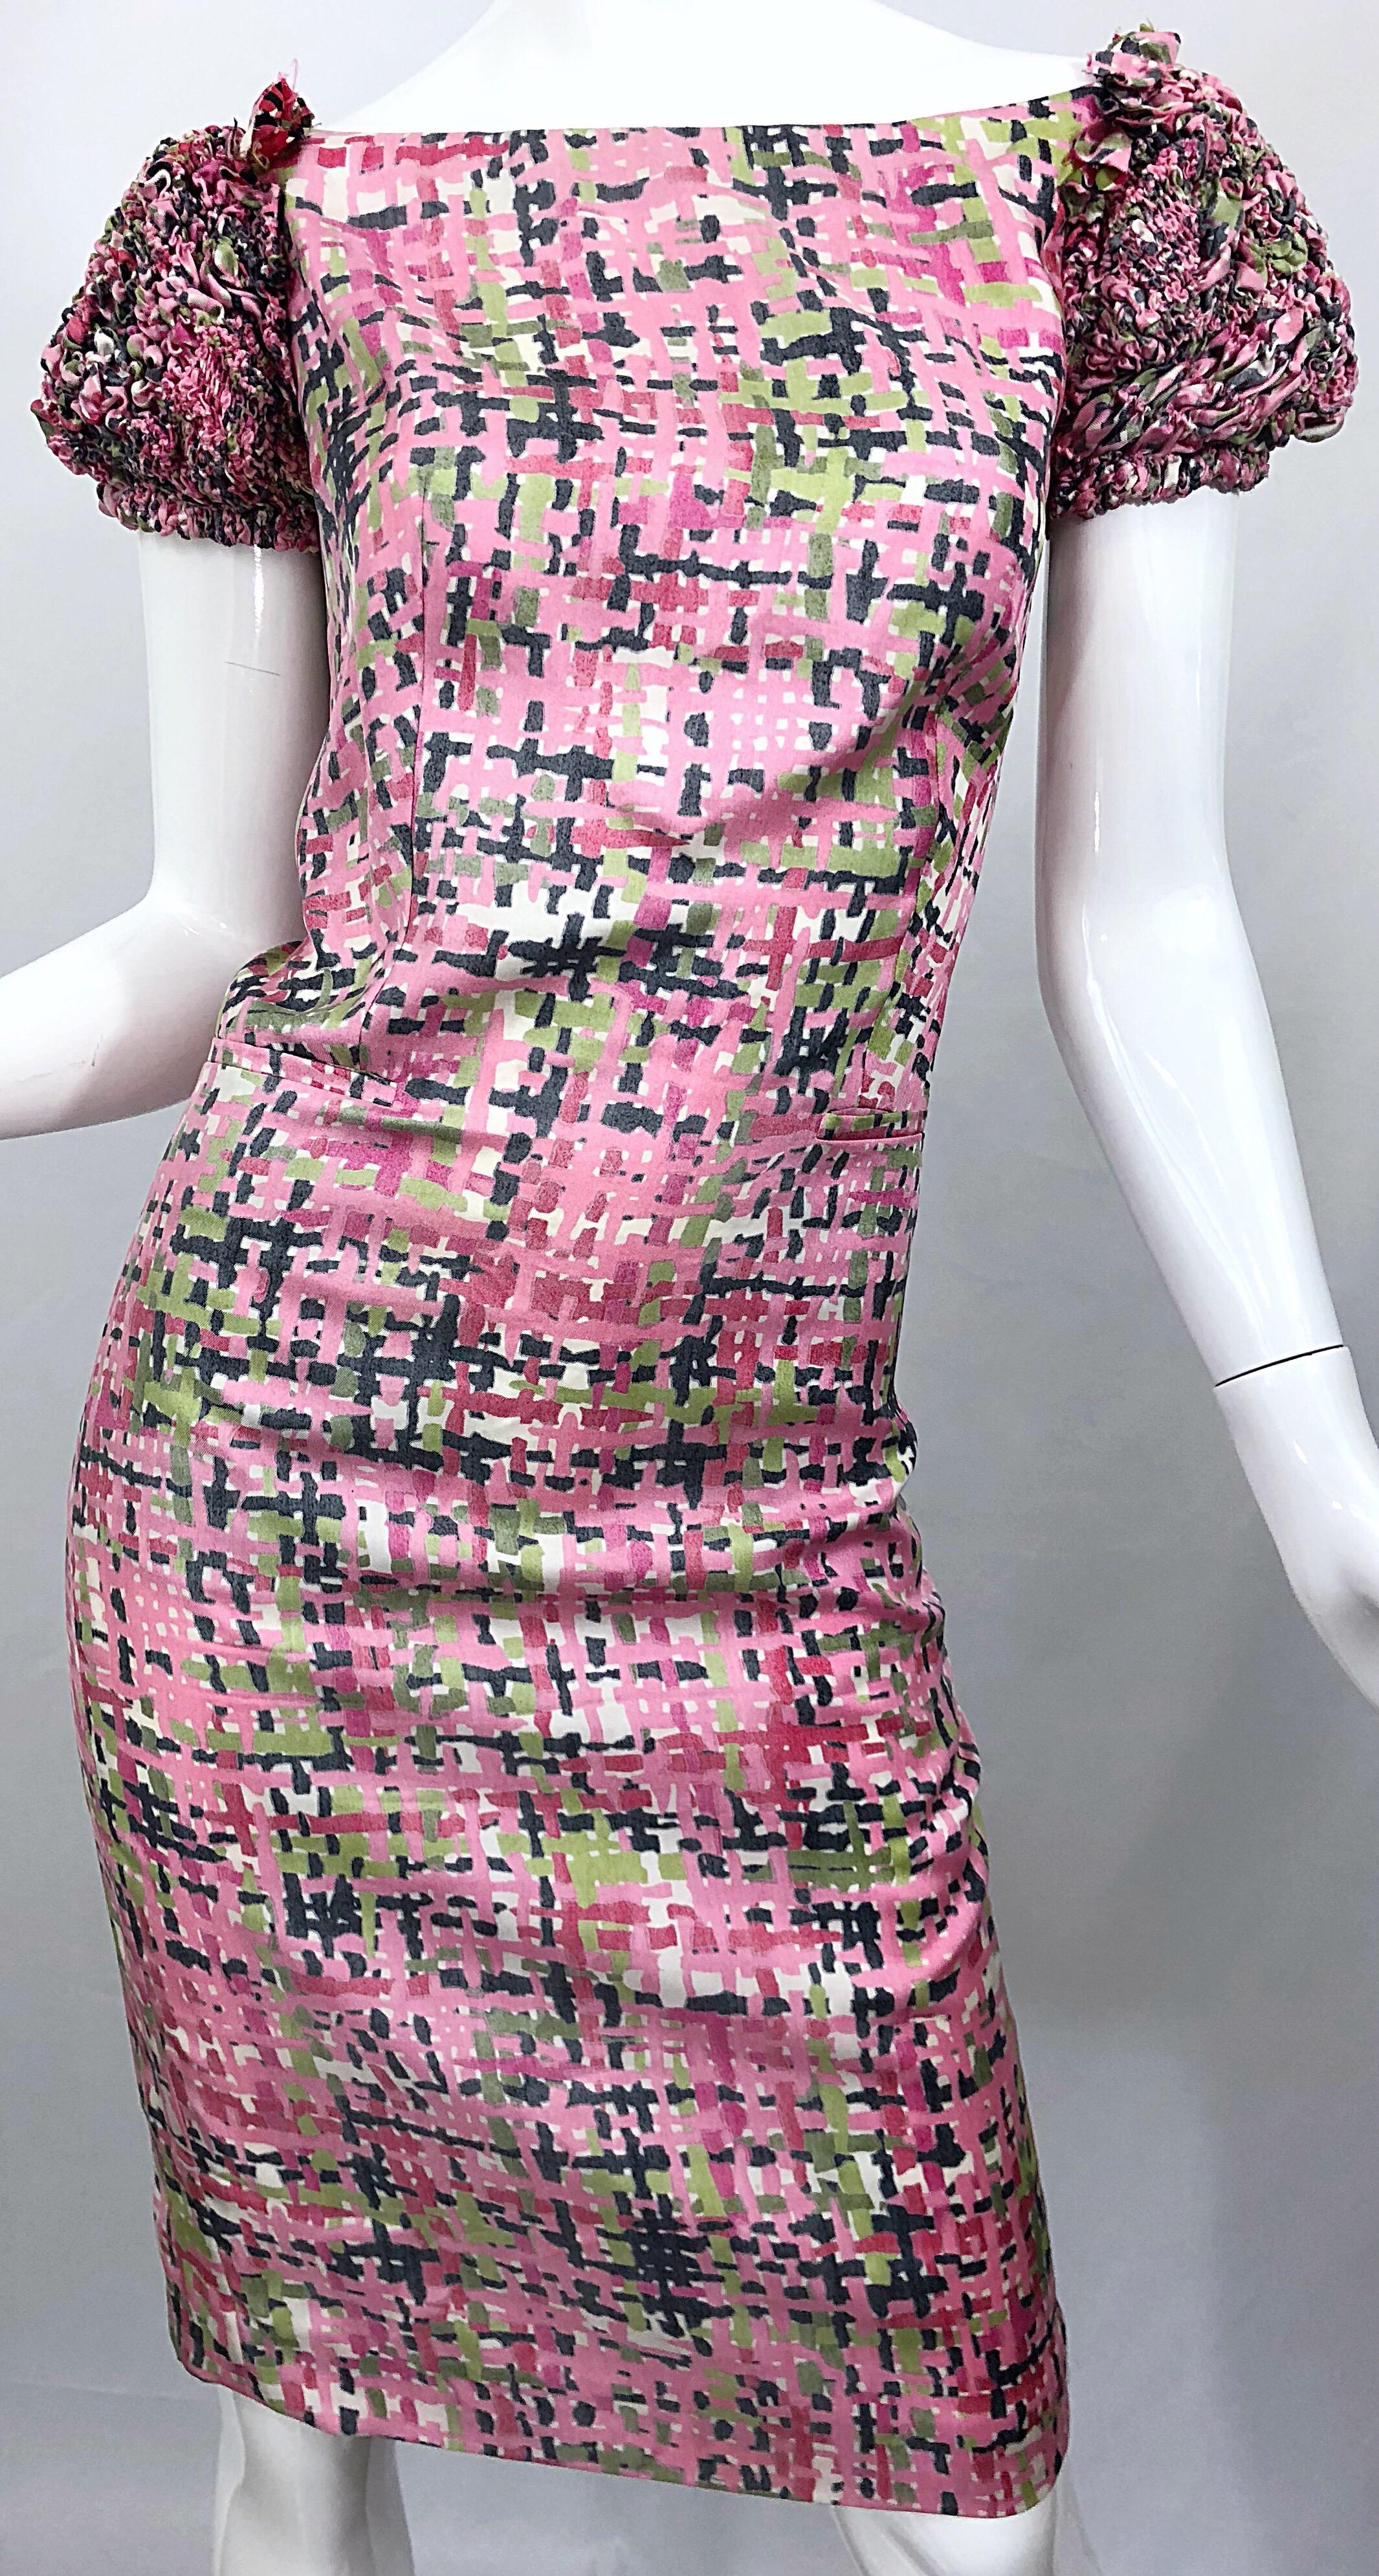 Beautiful never worn YVES SAINT LAURENT YSL Size 38 / US 6 pink and green silk puff sleeve dress! Various shades of pink, rose, and hot pink. Contrasting shades of green, avocado, and hunter green with ivory throughout. Elaborately ruched ruffle